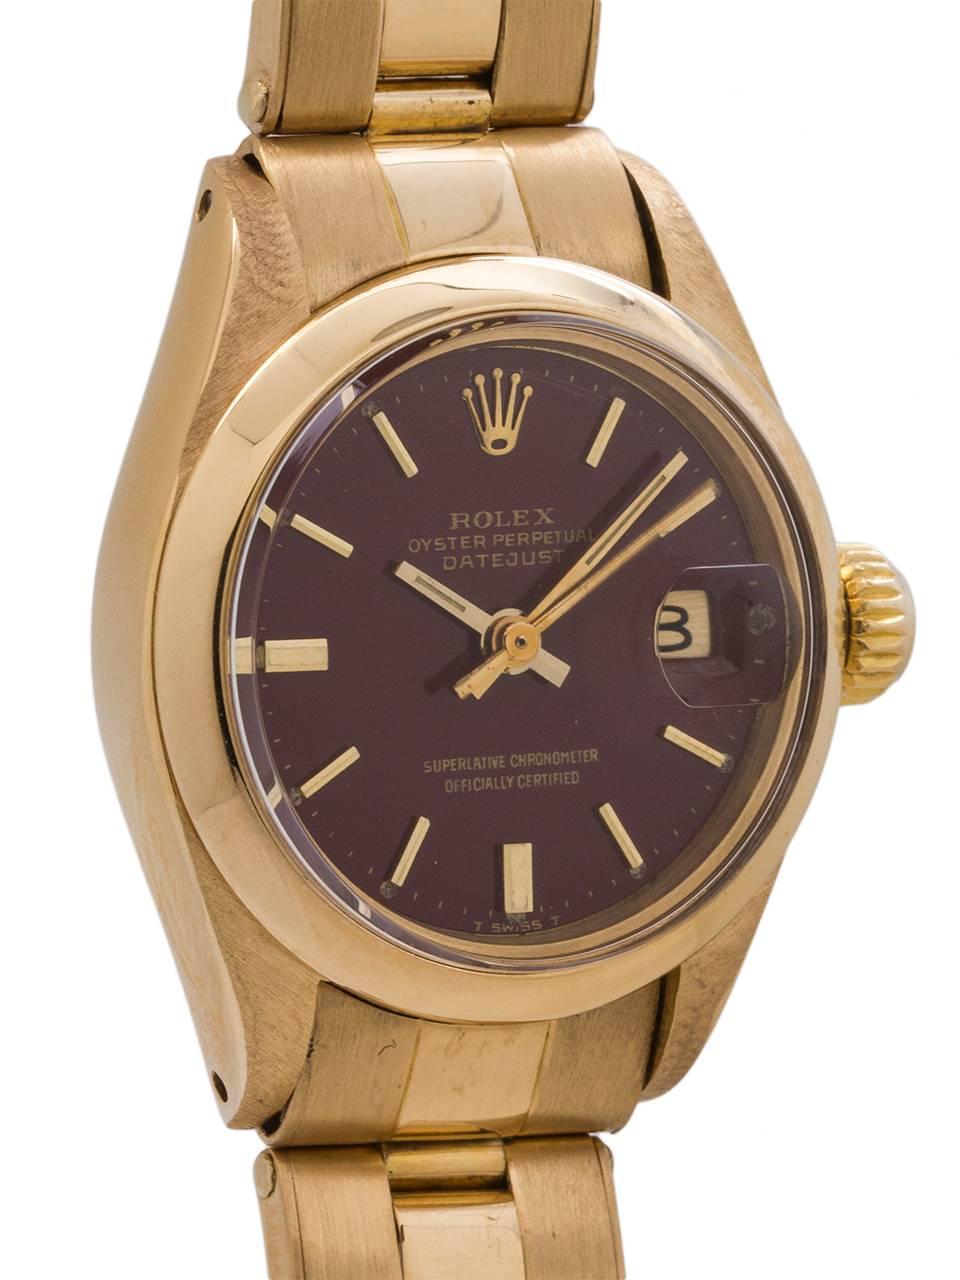 
Ultra rare lady’s Rolex Oyster Perpetual Date 18K yellow gold ref 6916 4 million serial # circa 1974, with original oxblood Stella dial. Featuring 26mm diameter case with smooth bezel, acrylic crystal, and original oxblood color stella dial with